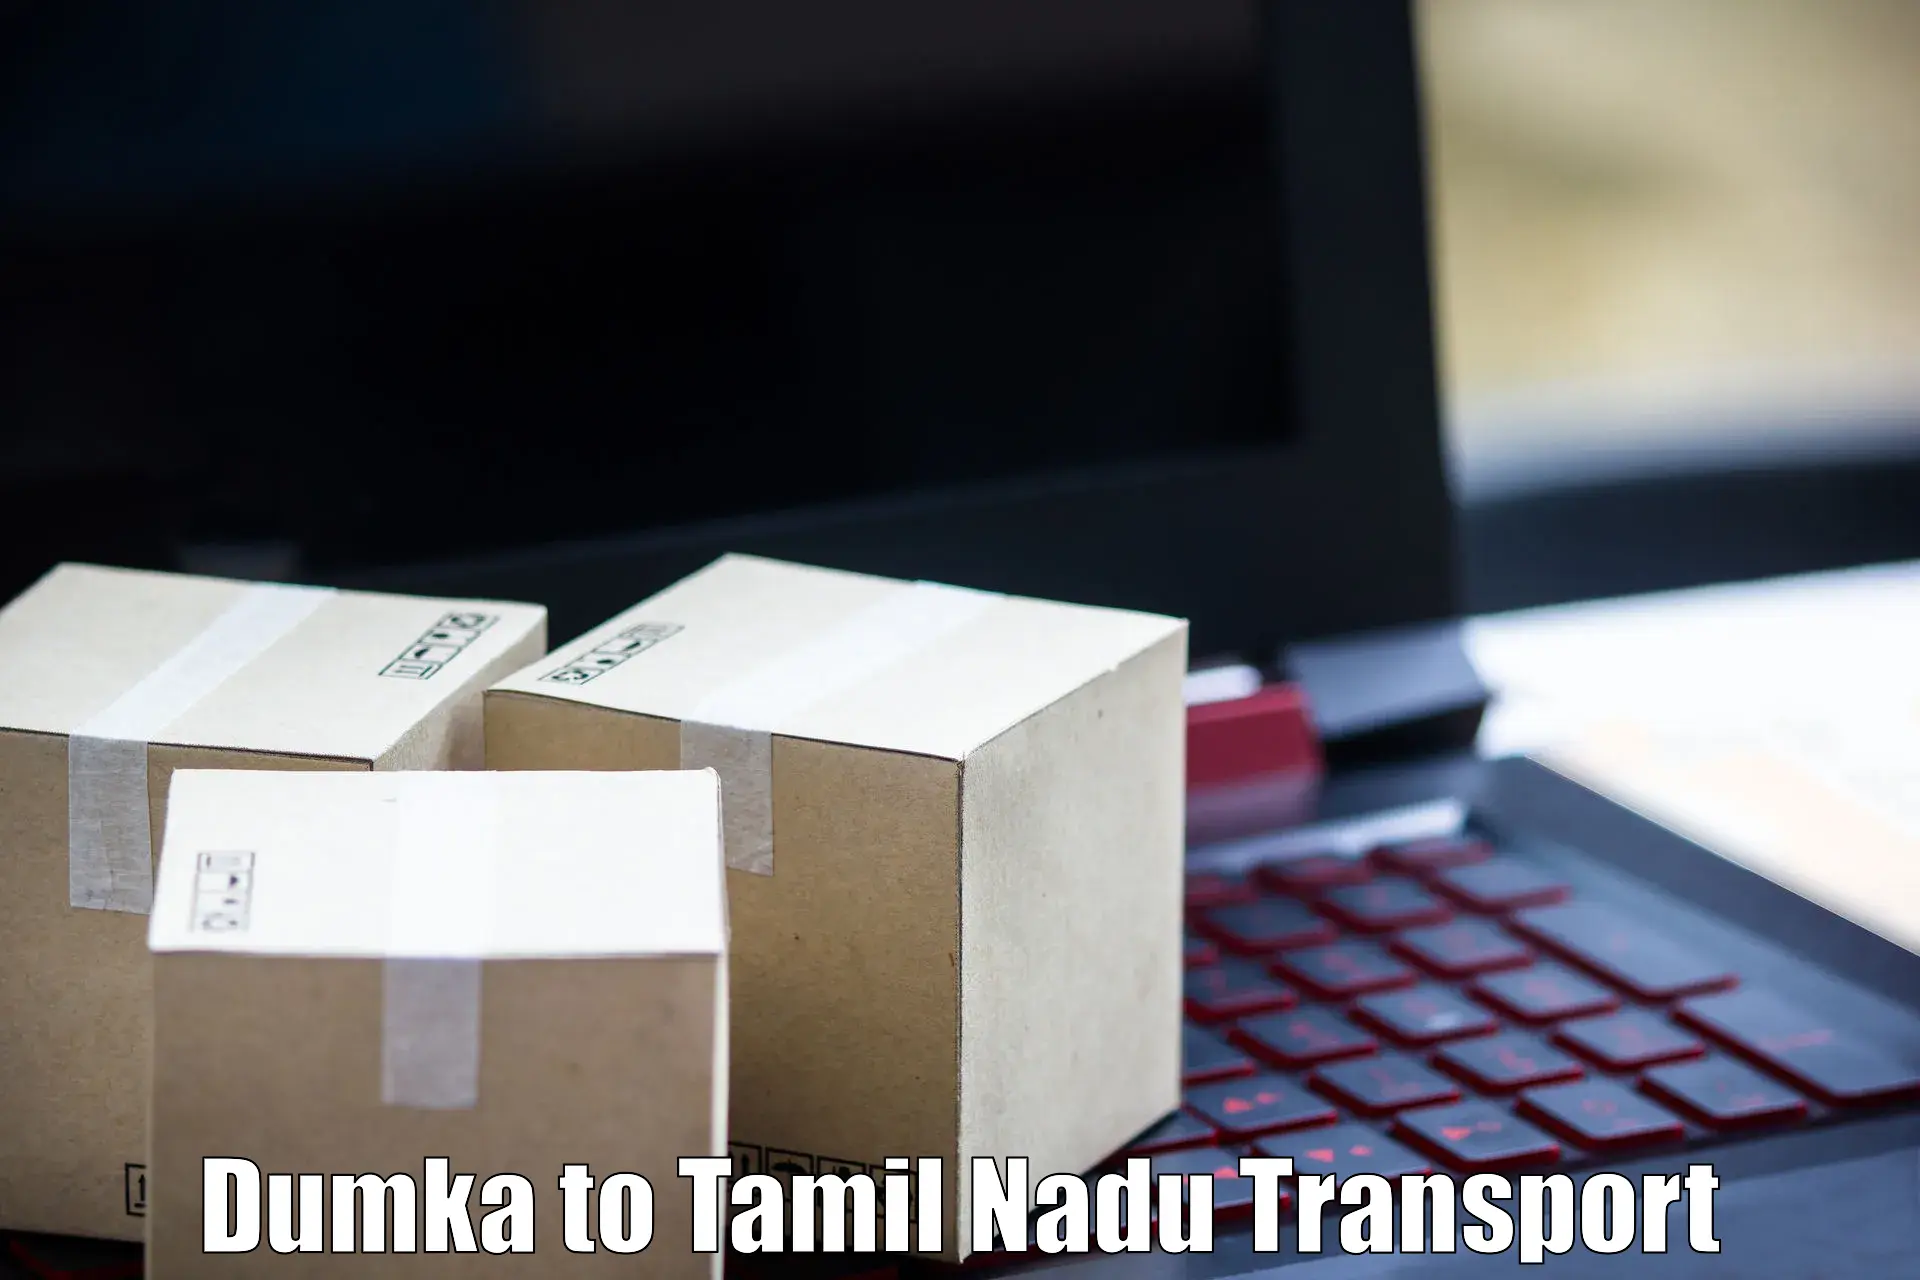 Online transport Dumka to Shanmugha Arts Science Technology and Research Academy Thanjavur